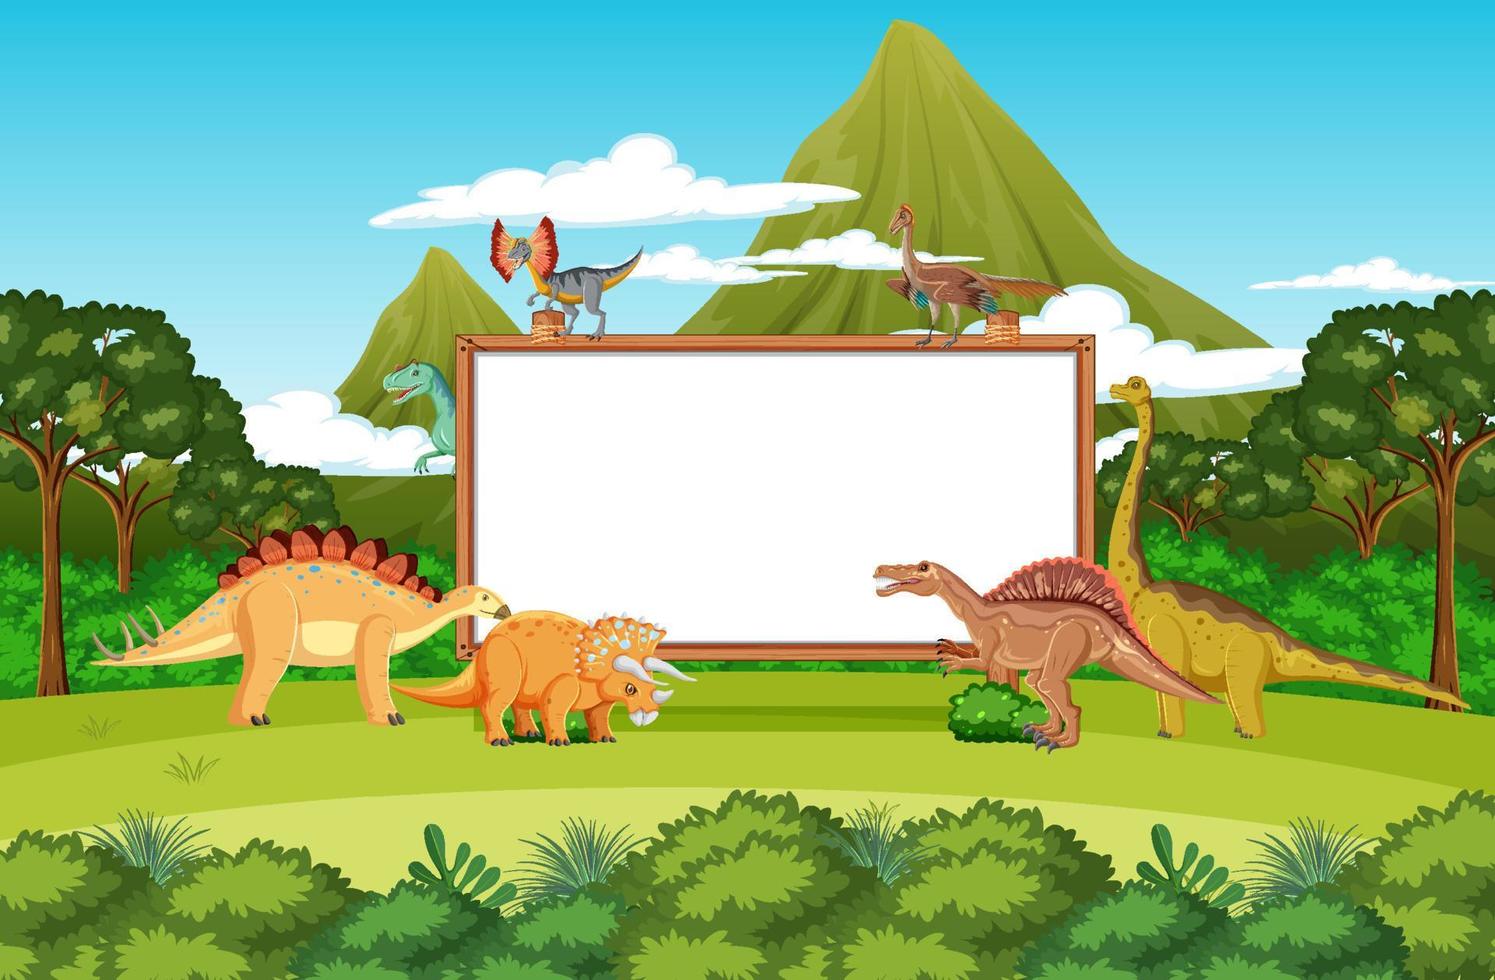 Scene with dinosaurs and whiteboard in the forest vector